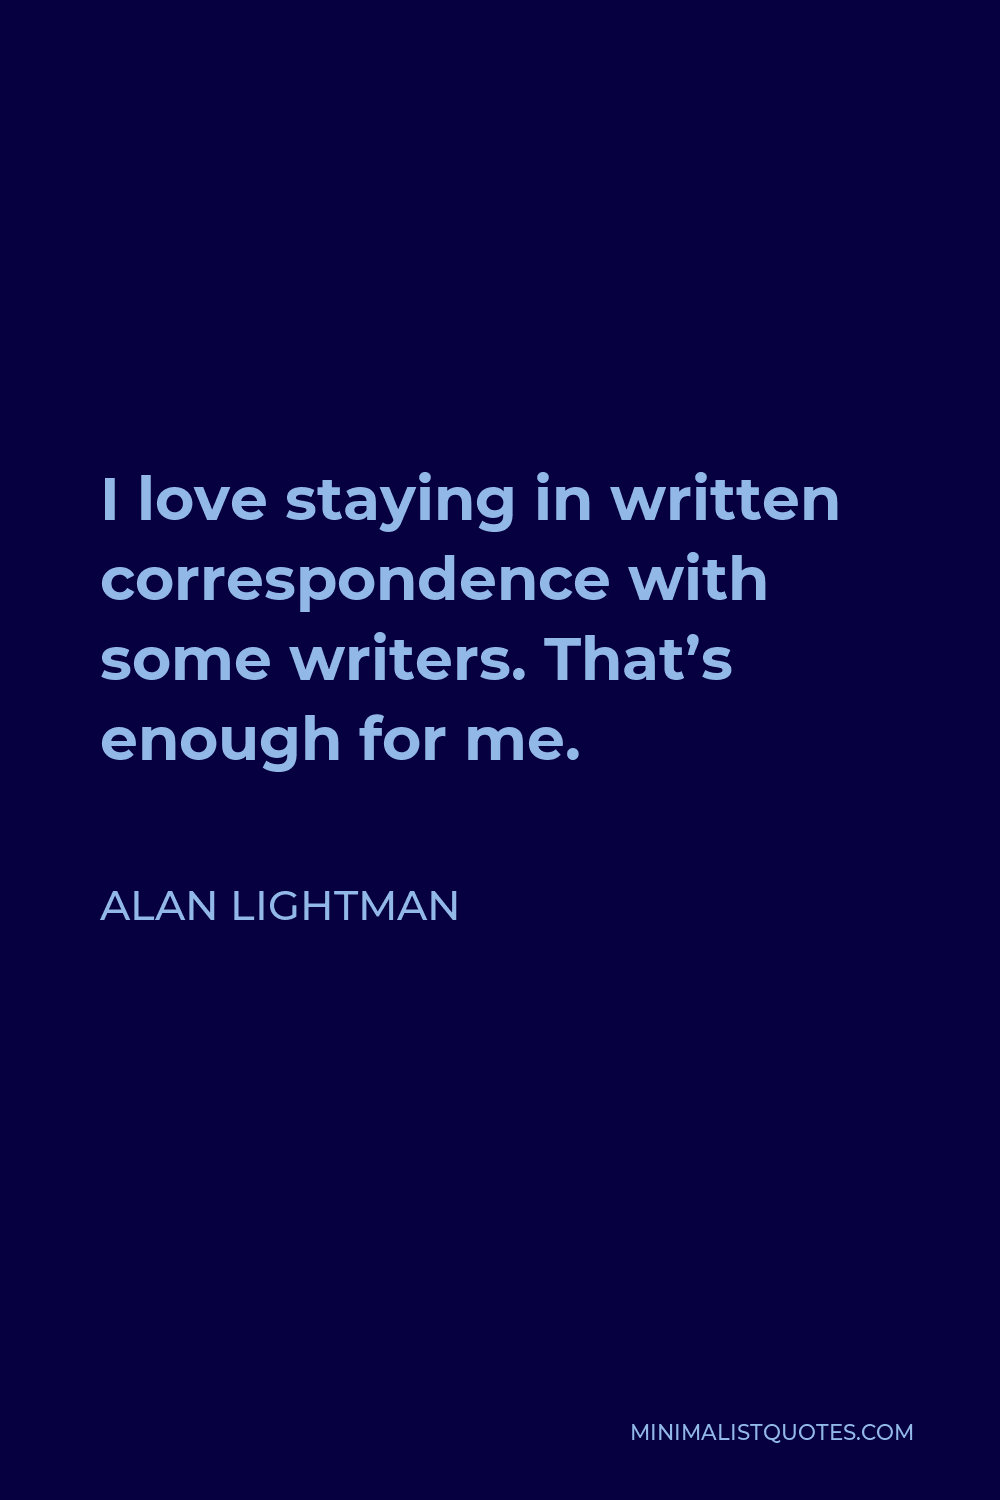 Alan Lightman Quote - I love staying in written correspondence with some writers. That’s enough for me.